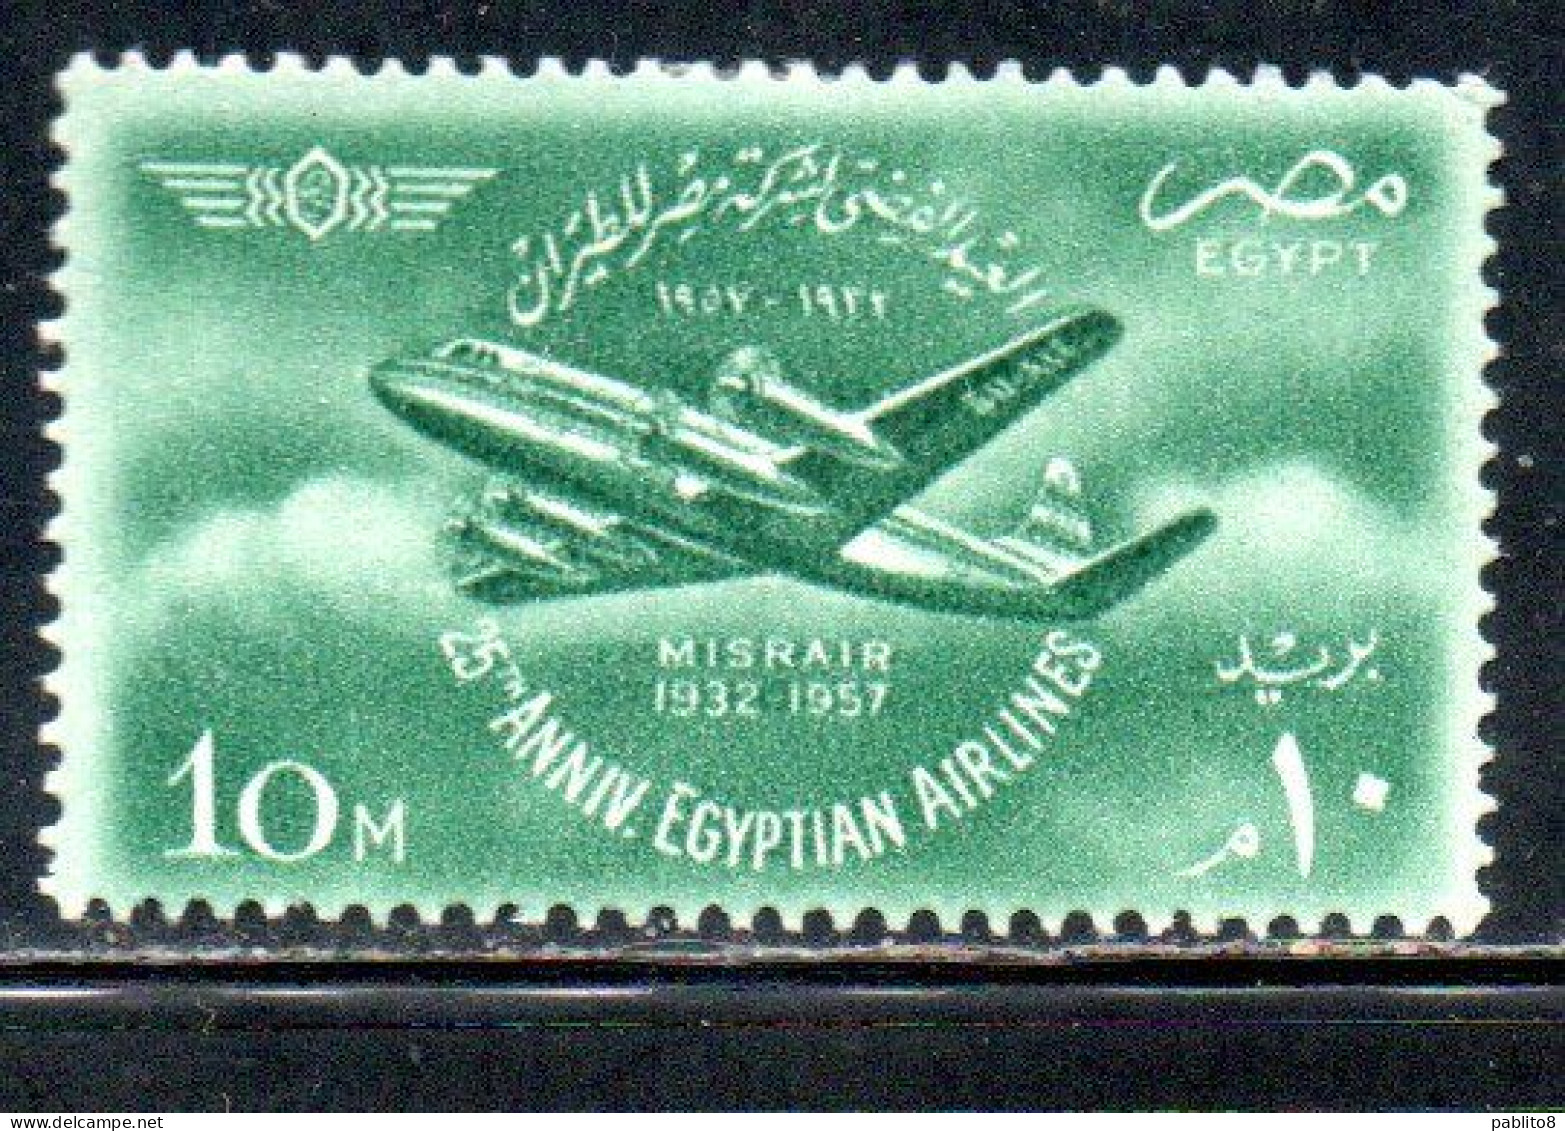 UAR EGYPT EGITTO 1957 EGYPTIAN AIR FORCE AND OF MISRAIR AIRLINE VISCOUNT PLANE 10m MH - Neufs